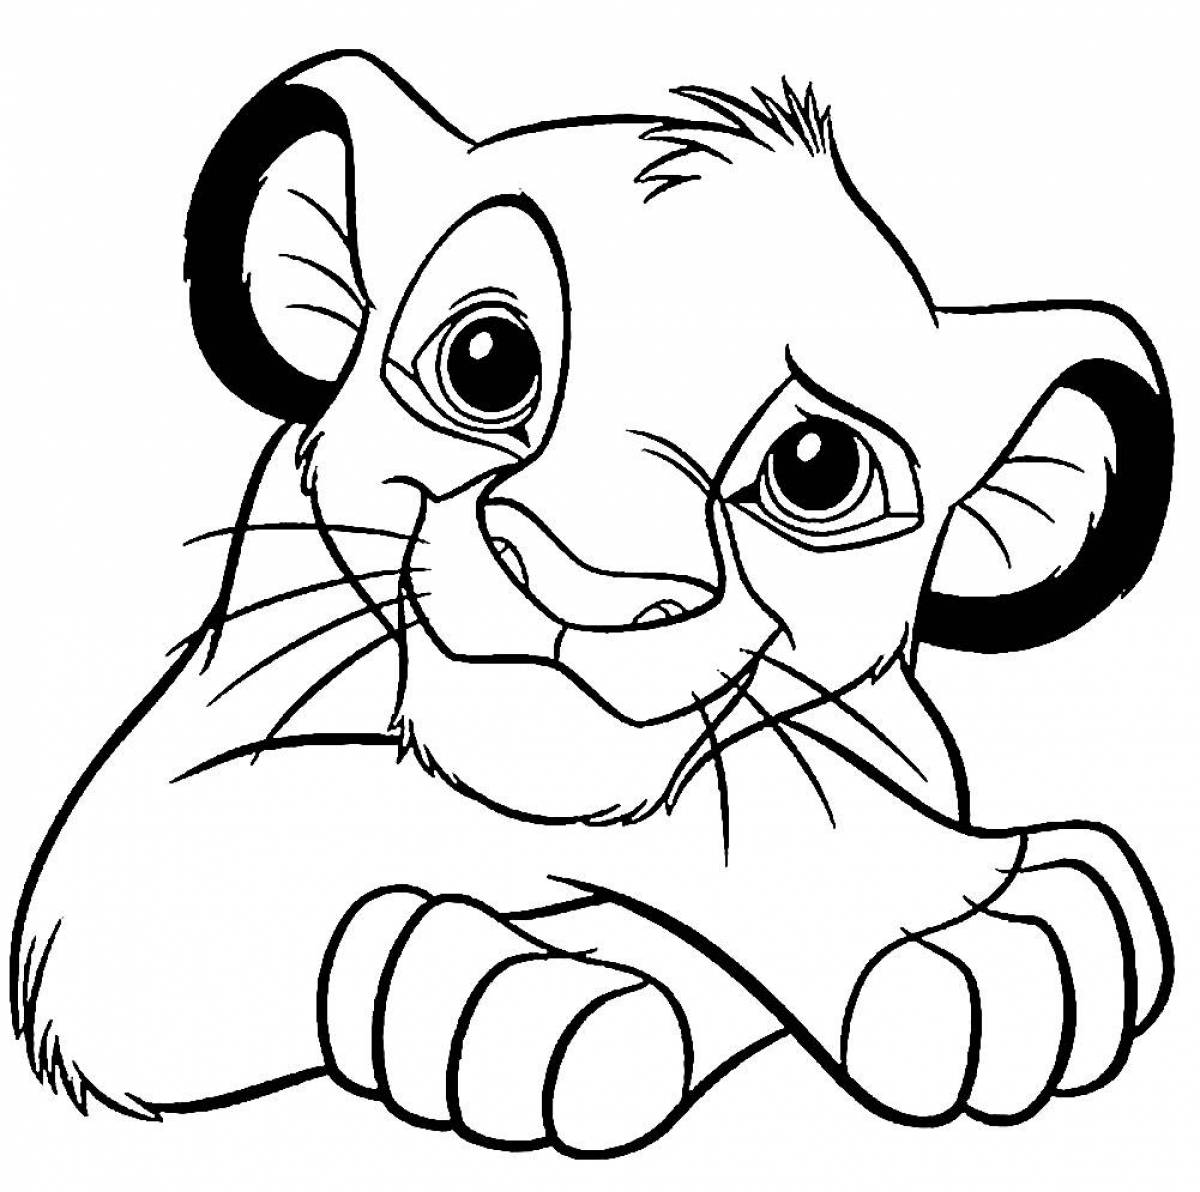 Playful craybaby coloring page